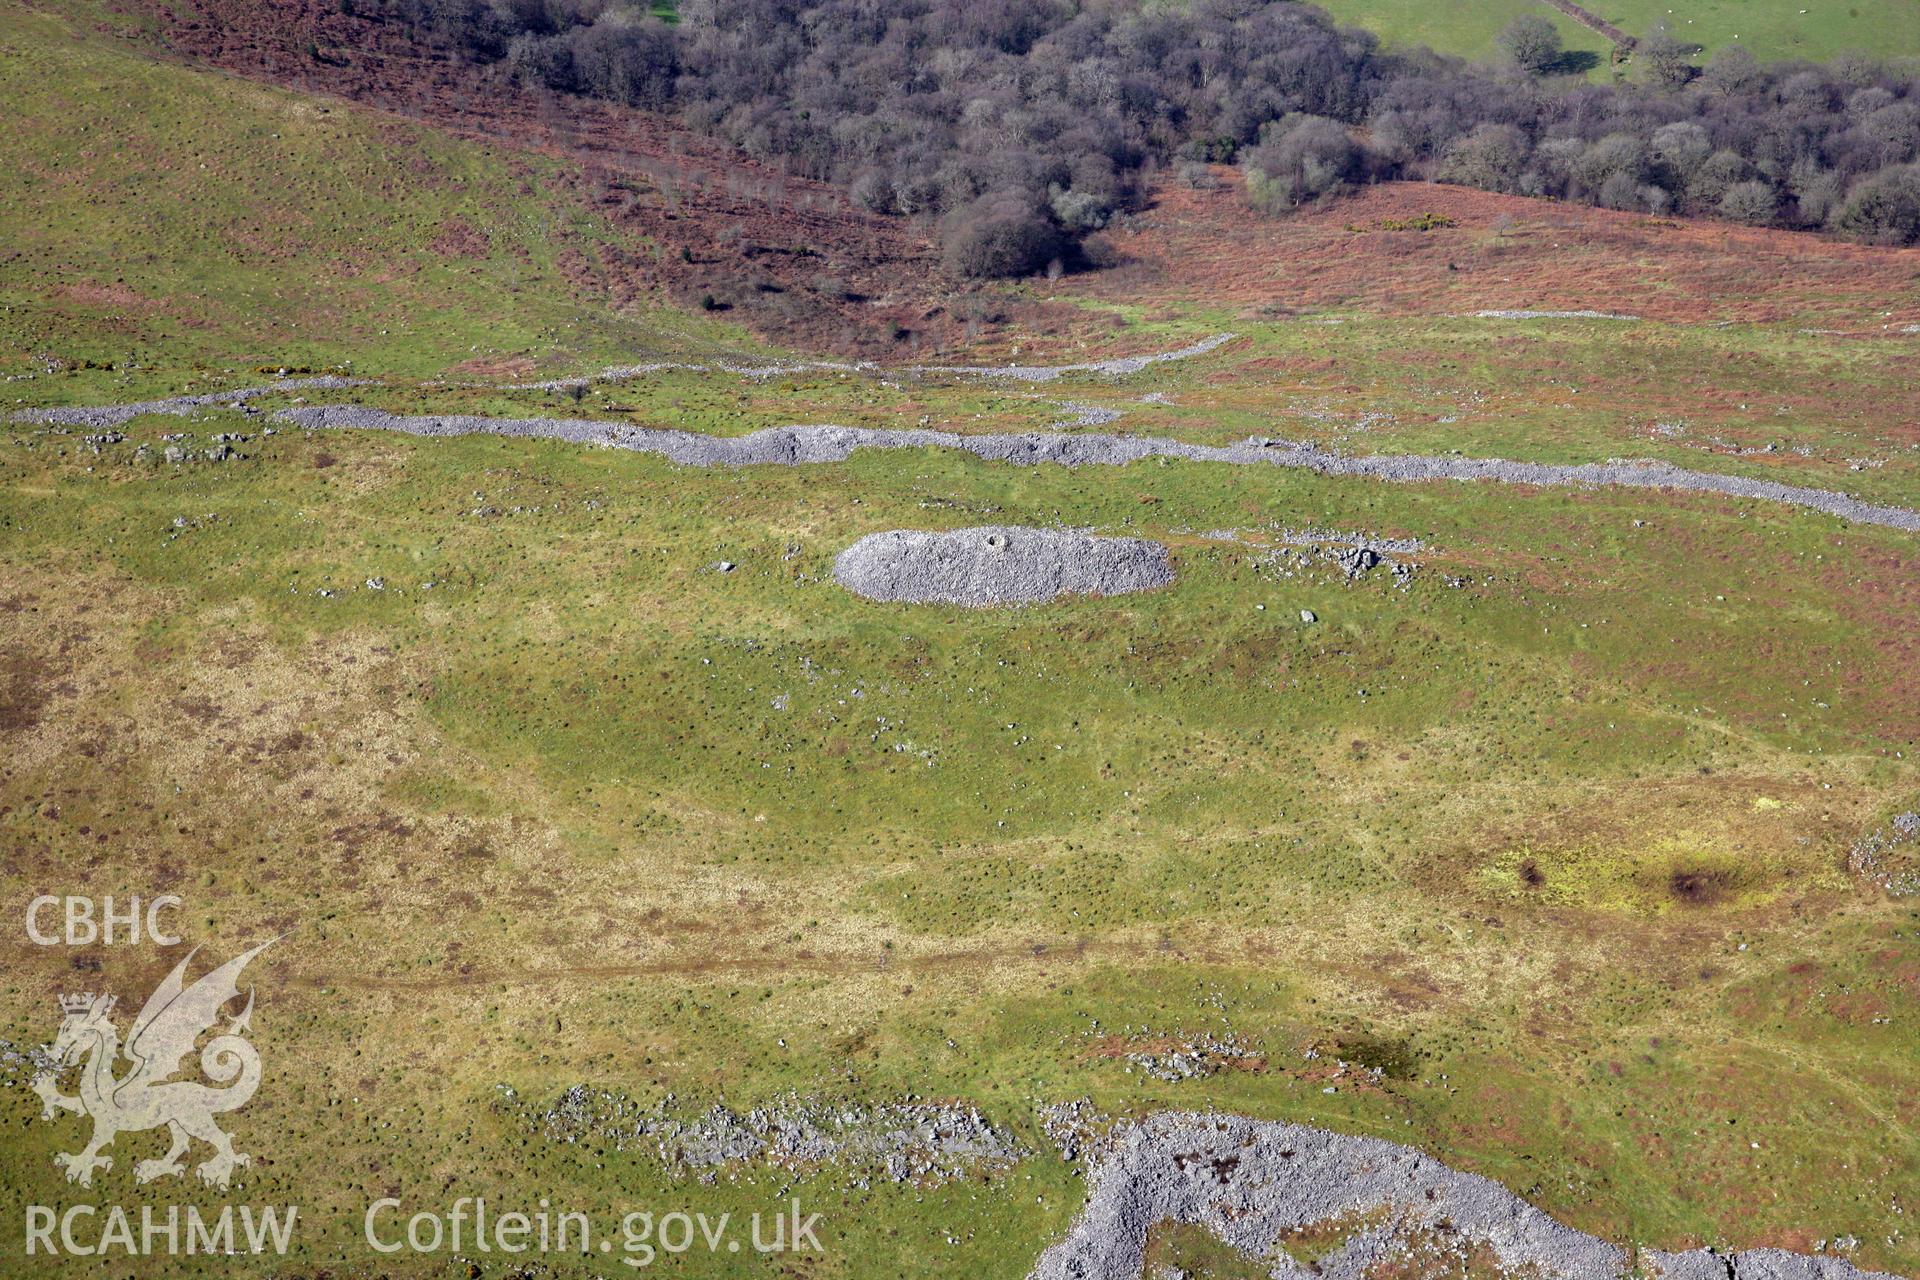 RCAHMW colour oblique photograph of Y Gaer Fawr, Carn Goch long cairn. Taken by Toby Driver and Oliver Davies on 28/03/2012.